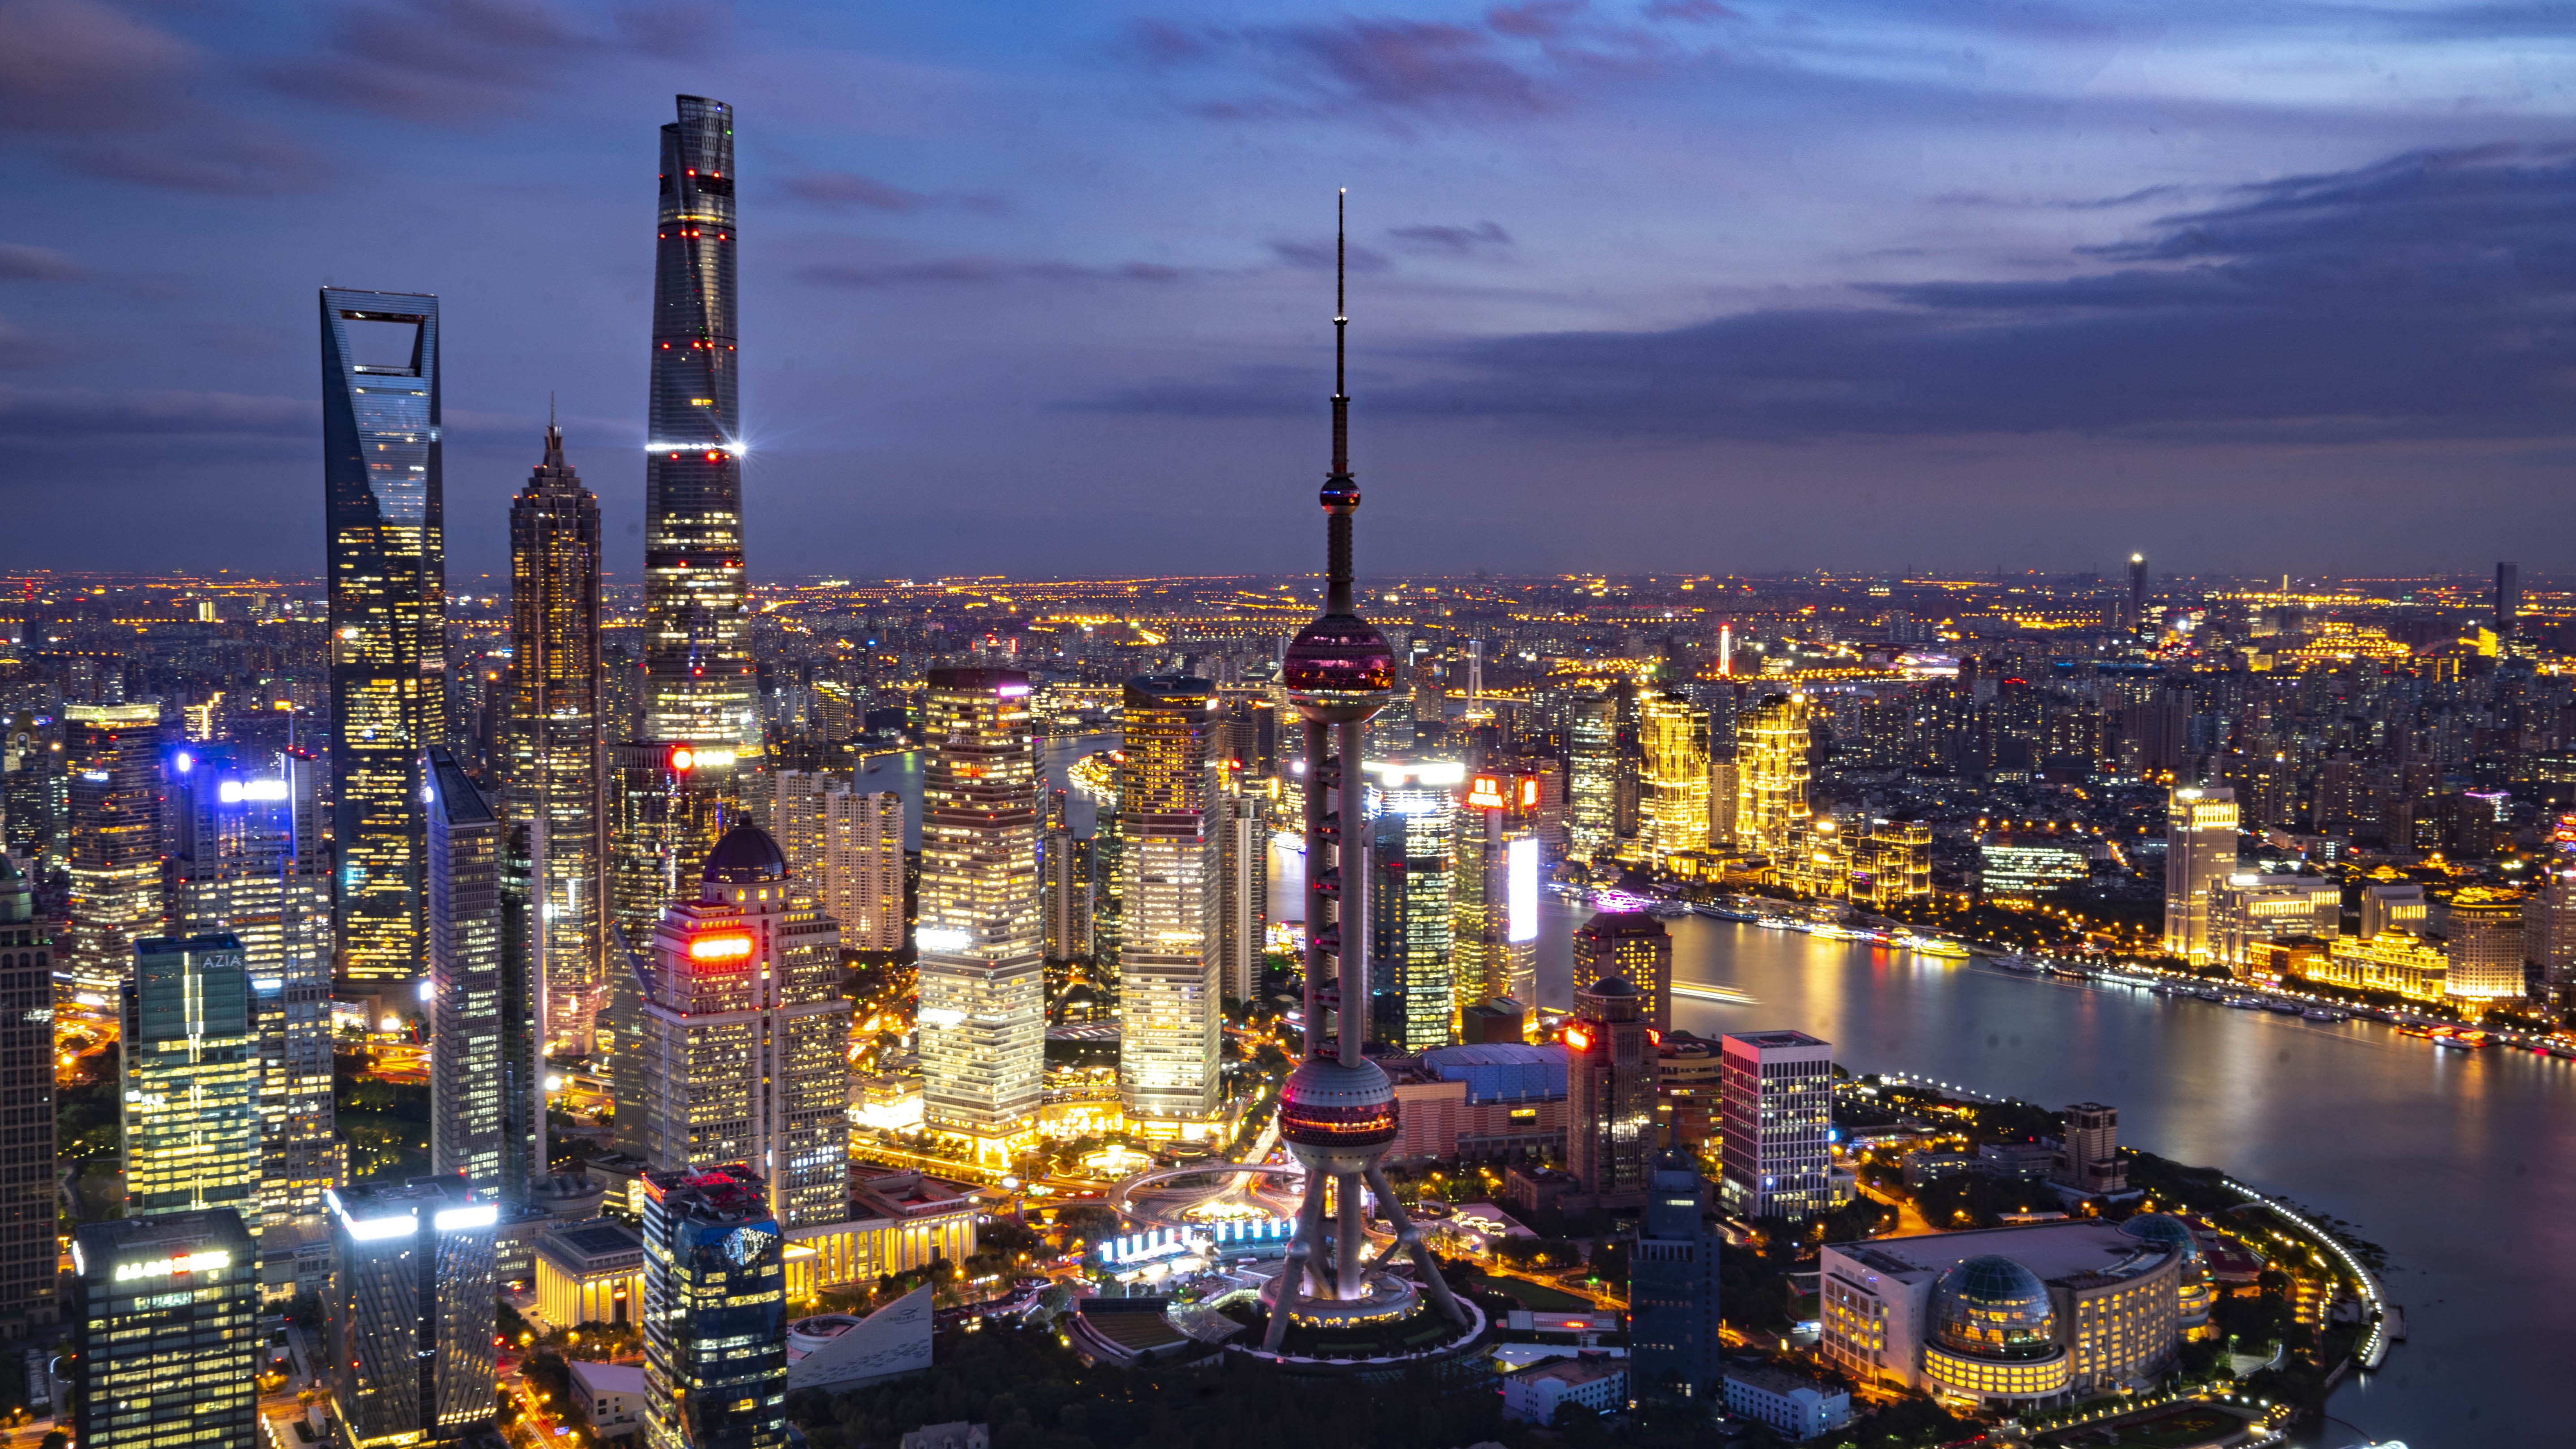 One Night In Shanghai This City Unveils List Of Nighttime Cultural And